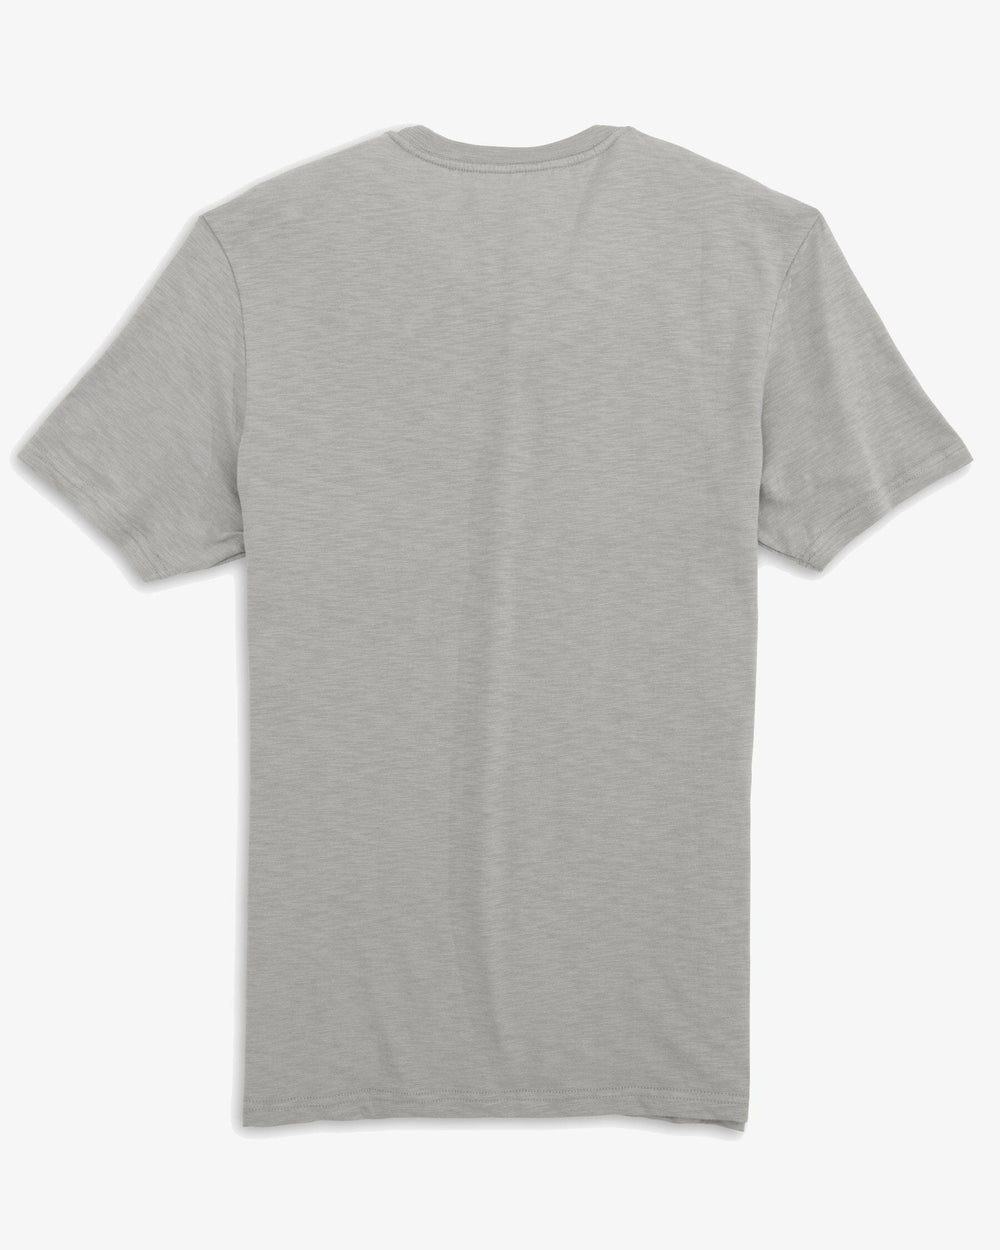 The back of the Men's Sun Farer Short Sleeve T-Shirt by Southern Tide - Steel Grey